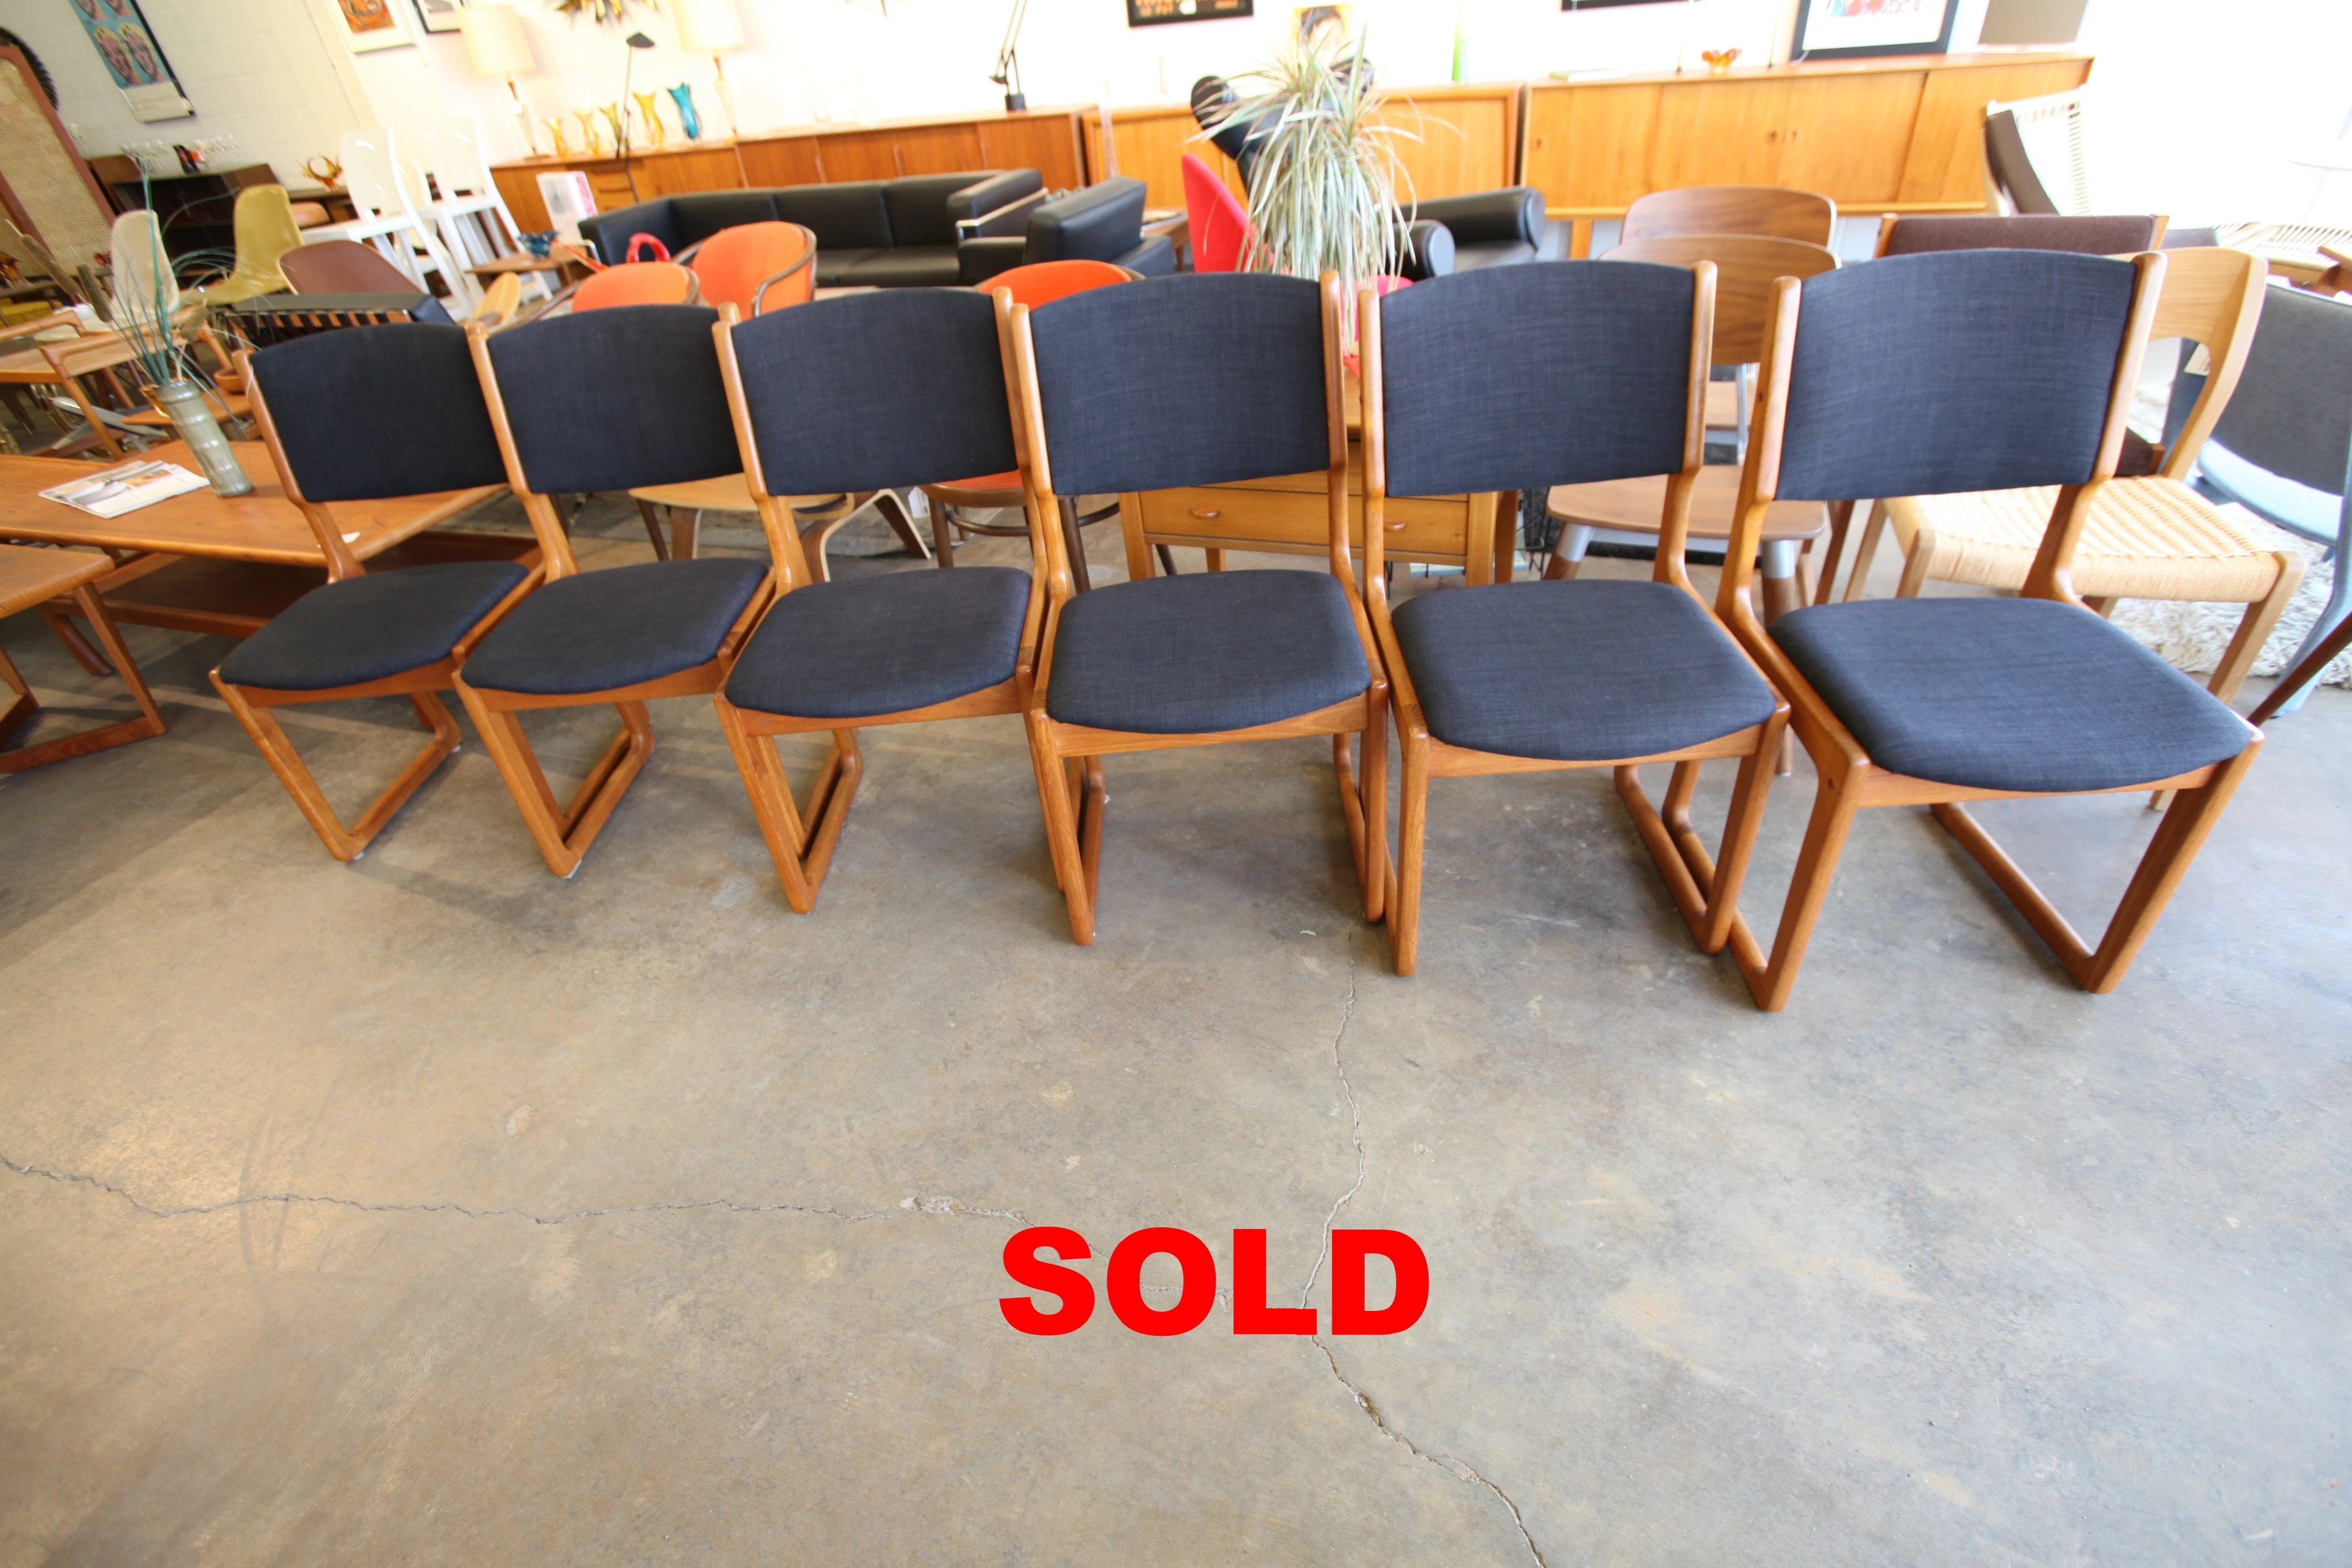 Set of 6 Vintage Well Made Heavy Teak Dining Chairs (19.25"W x 20.5"D x 35"H)